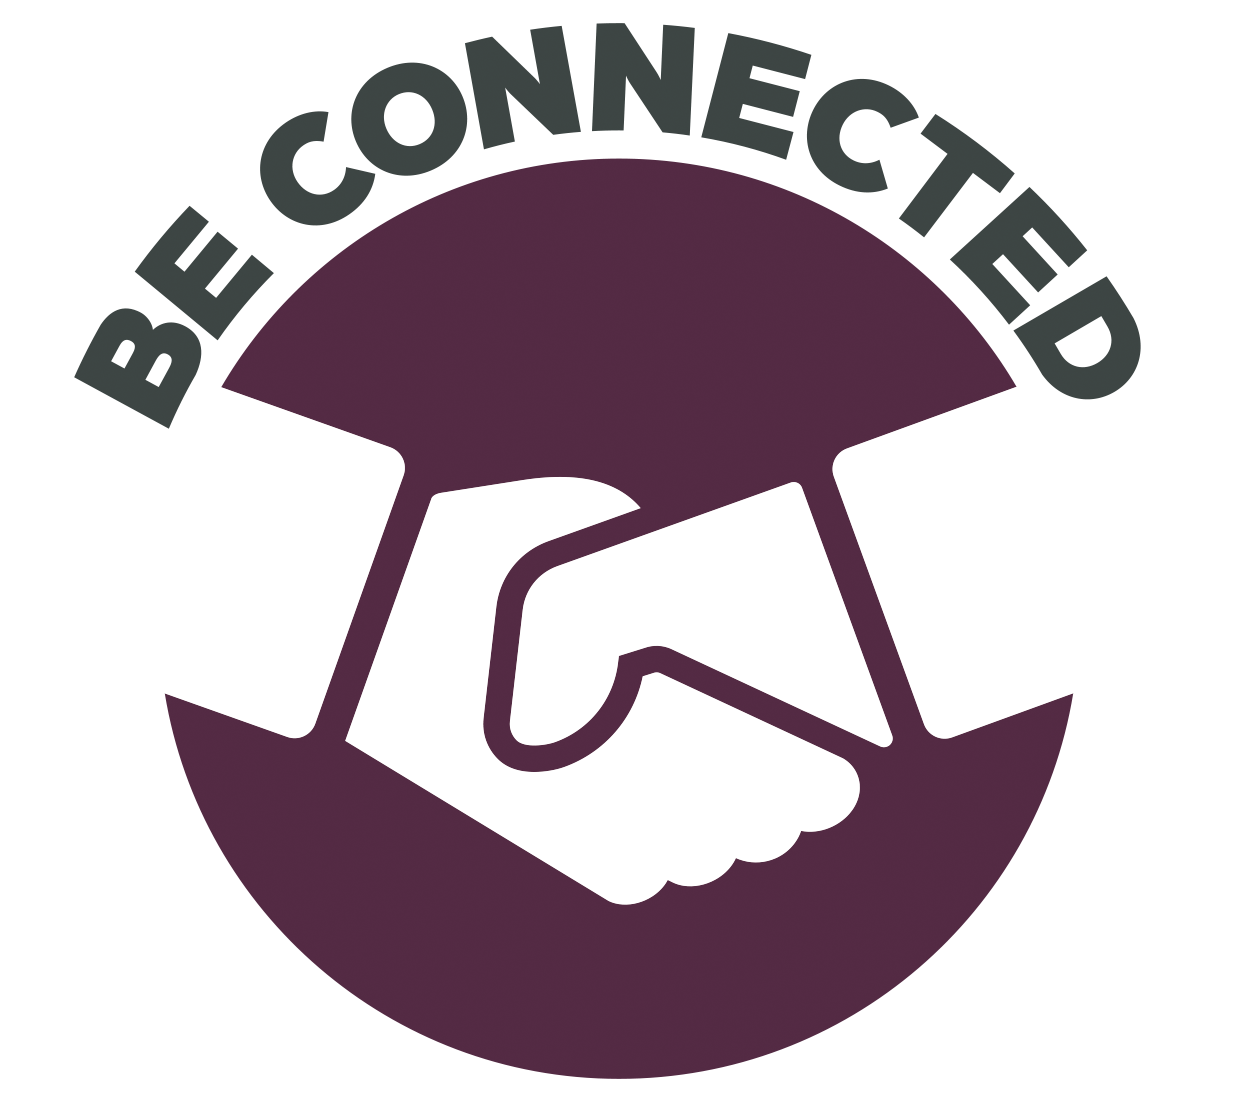 be connected